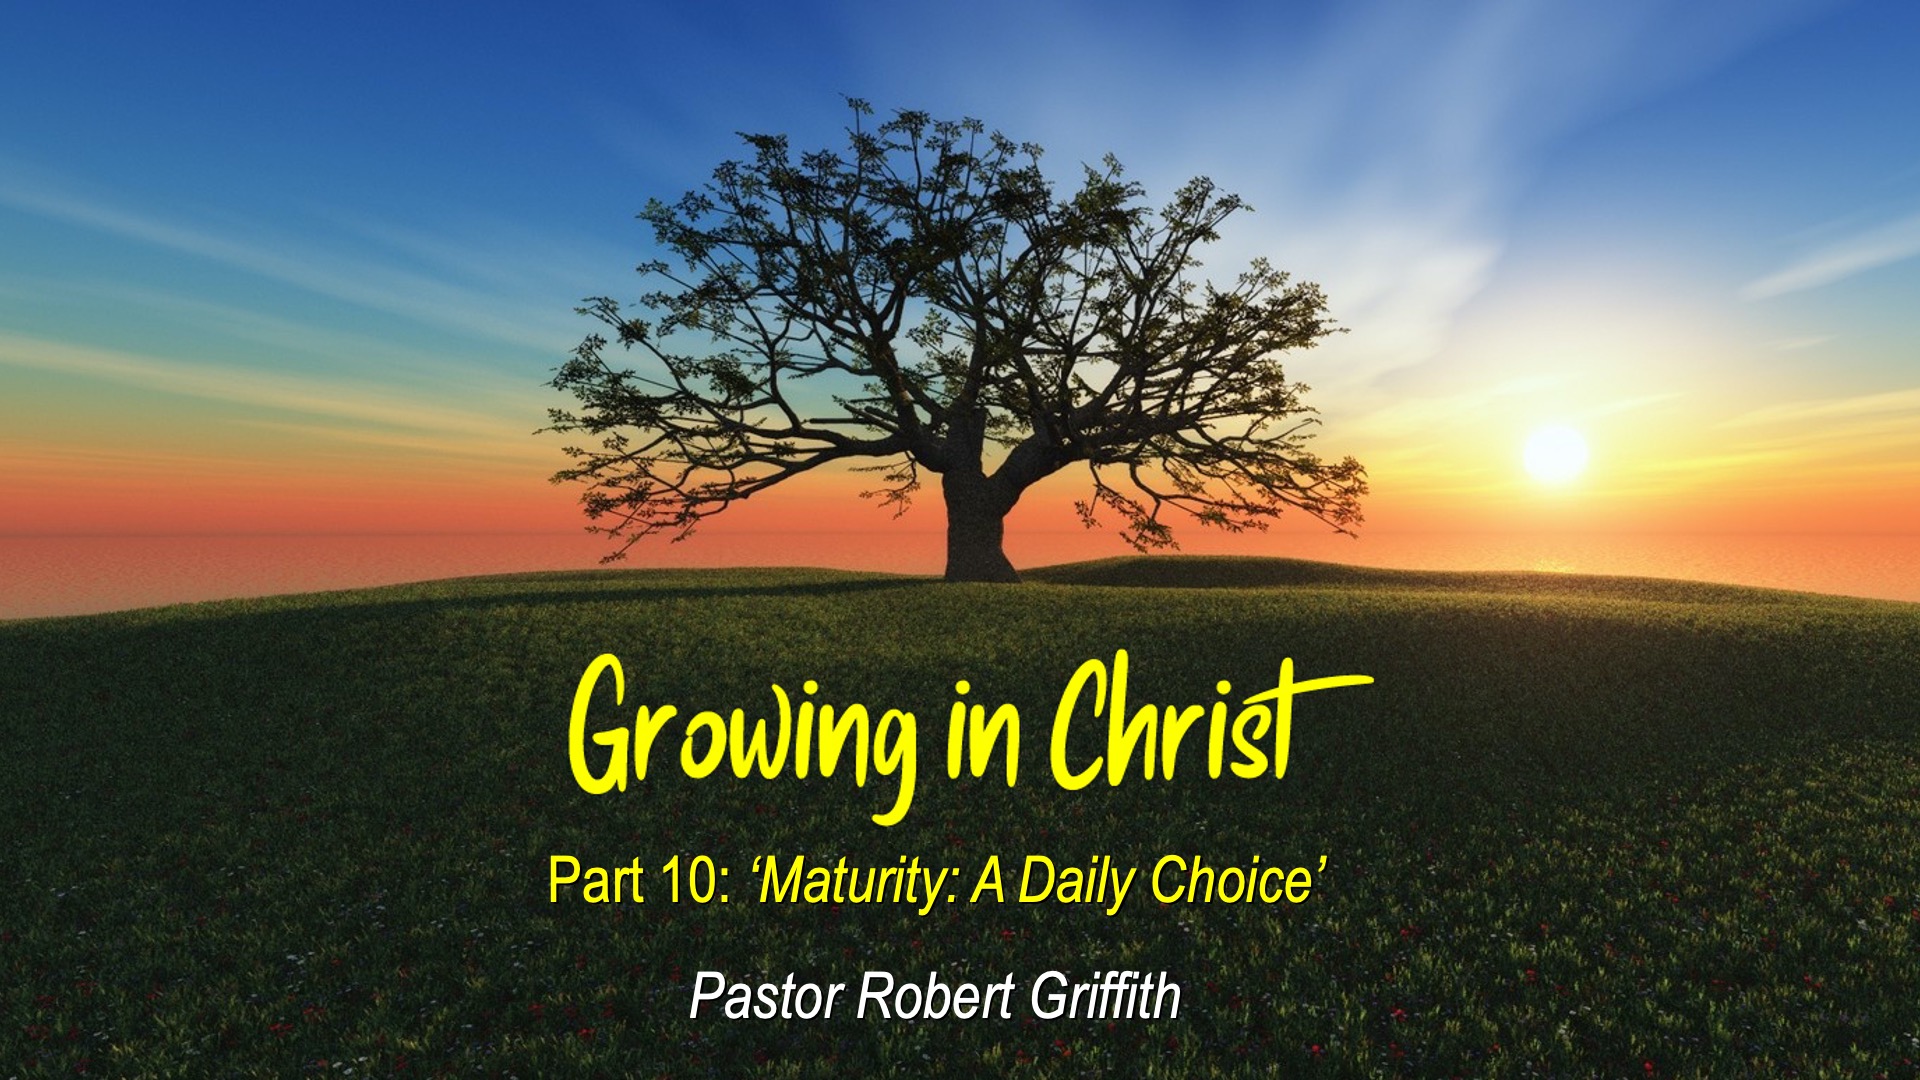 Growing in Christ (10)‘Maturity: A Daily Choice’